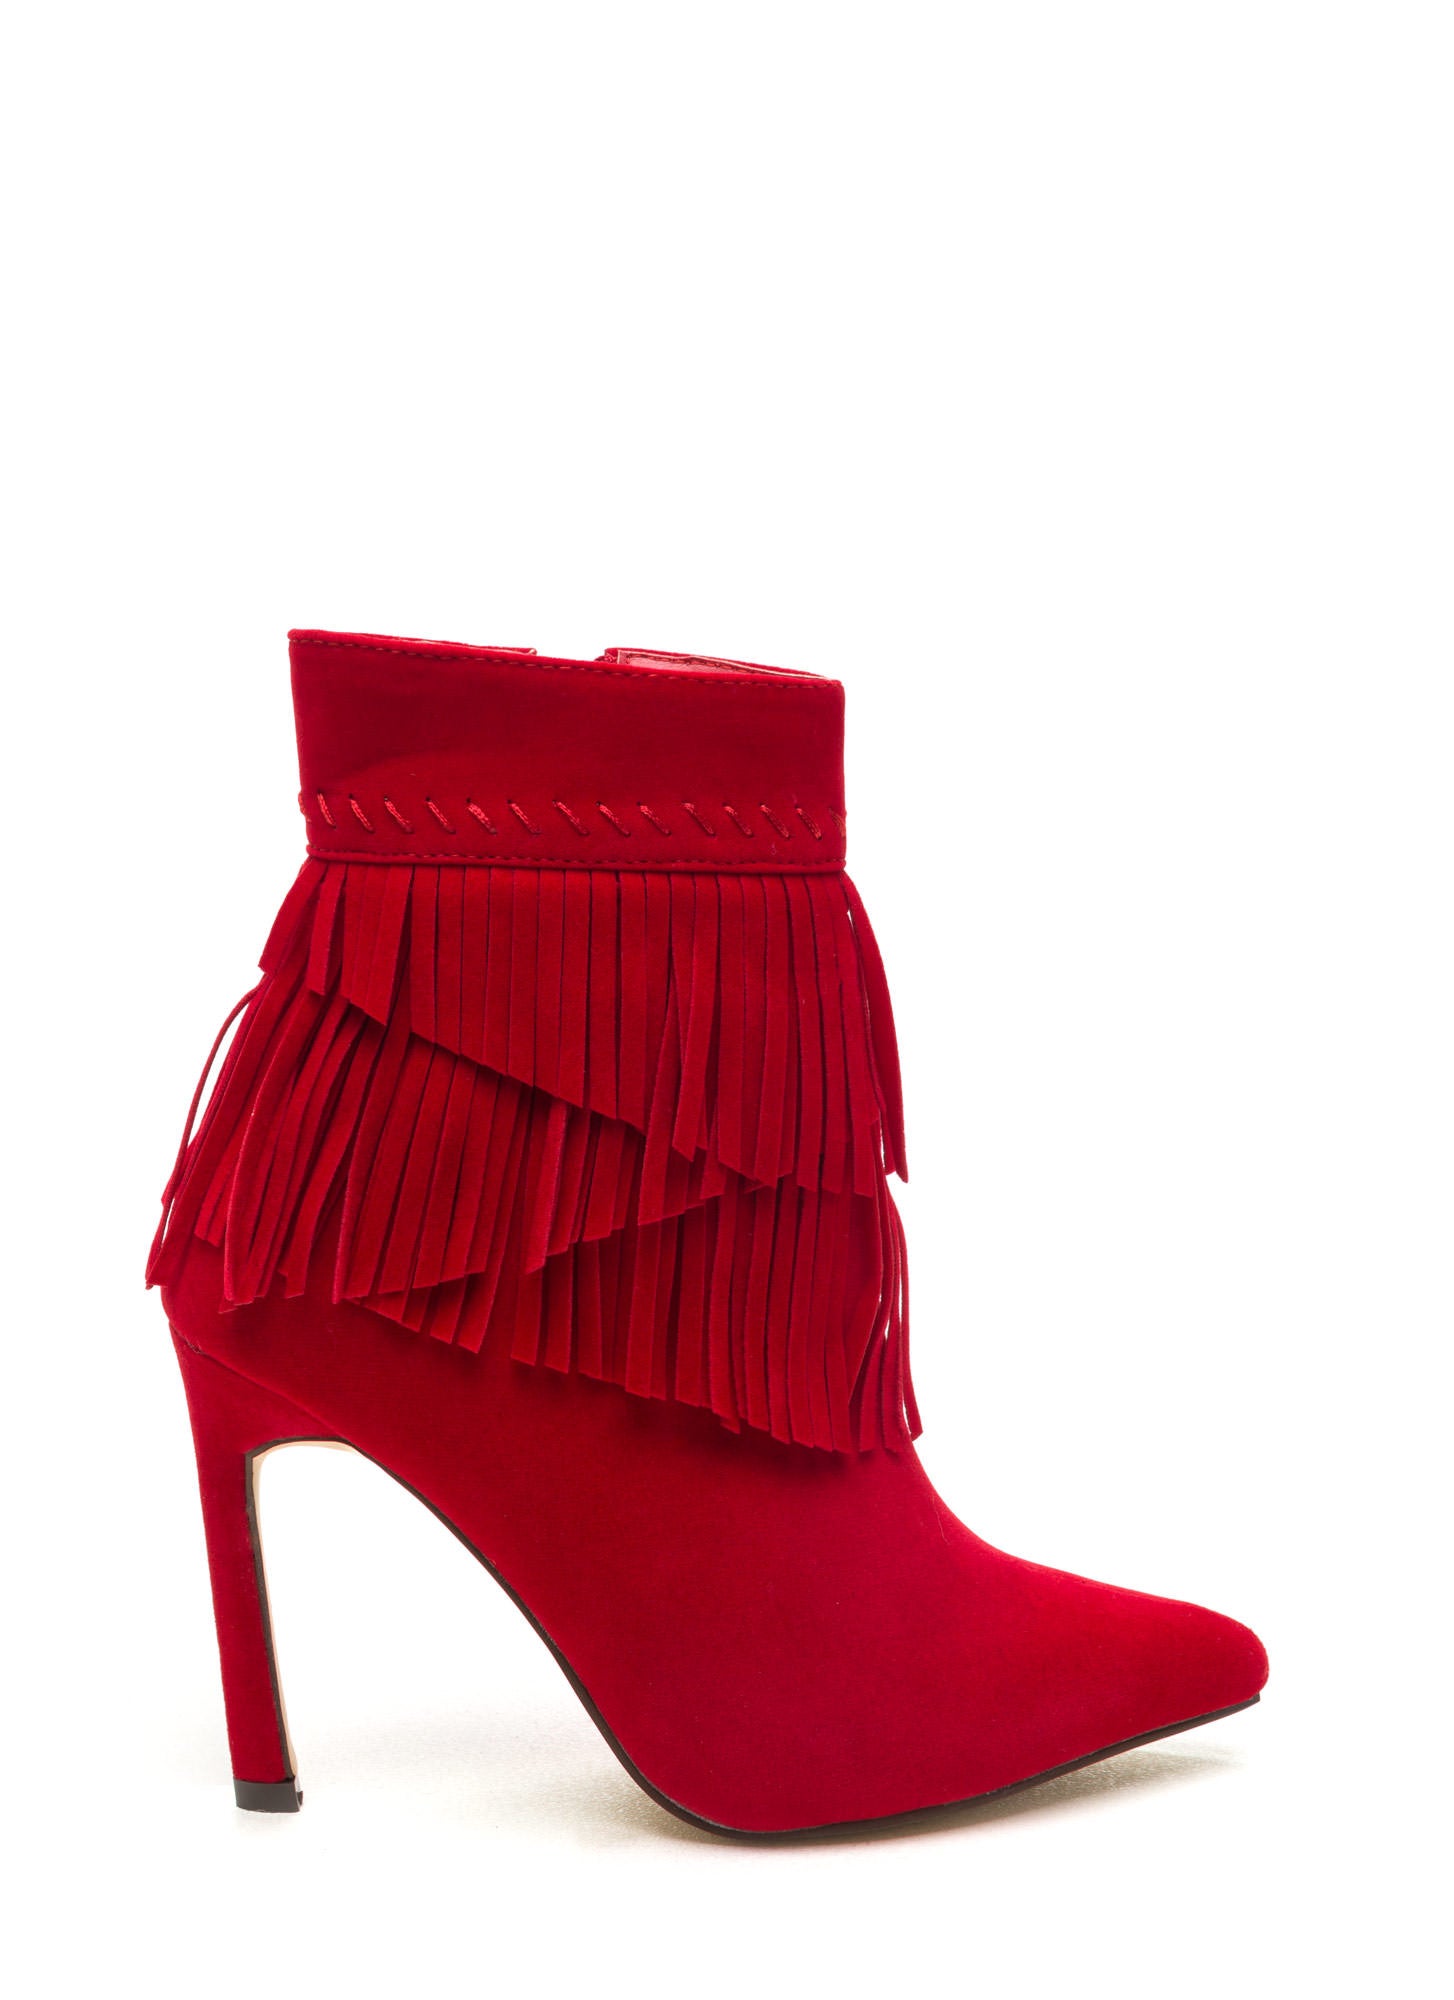 Lady in Red: 15 Finds That Will Make Your Valentine’s Day Pop!